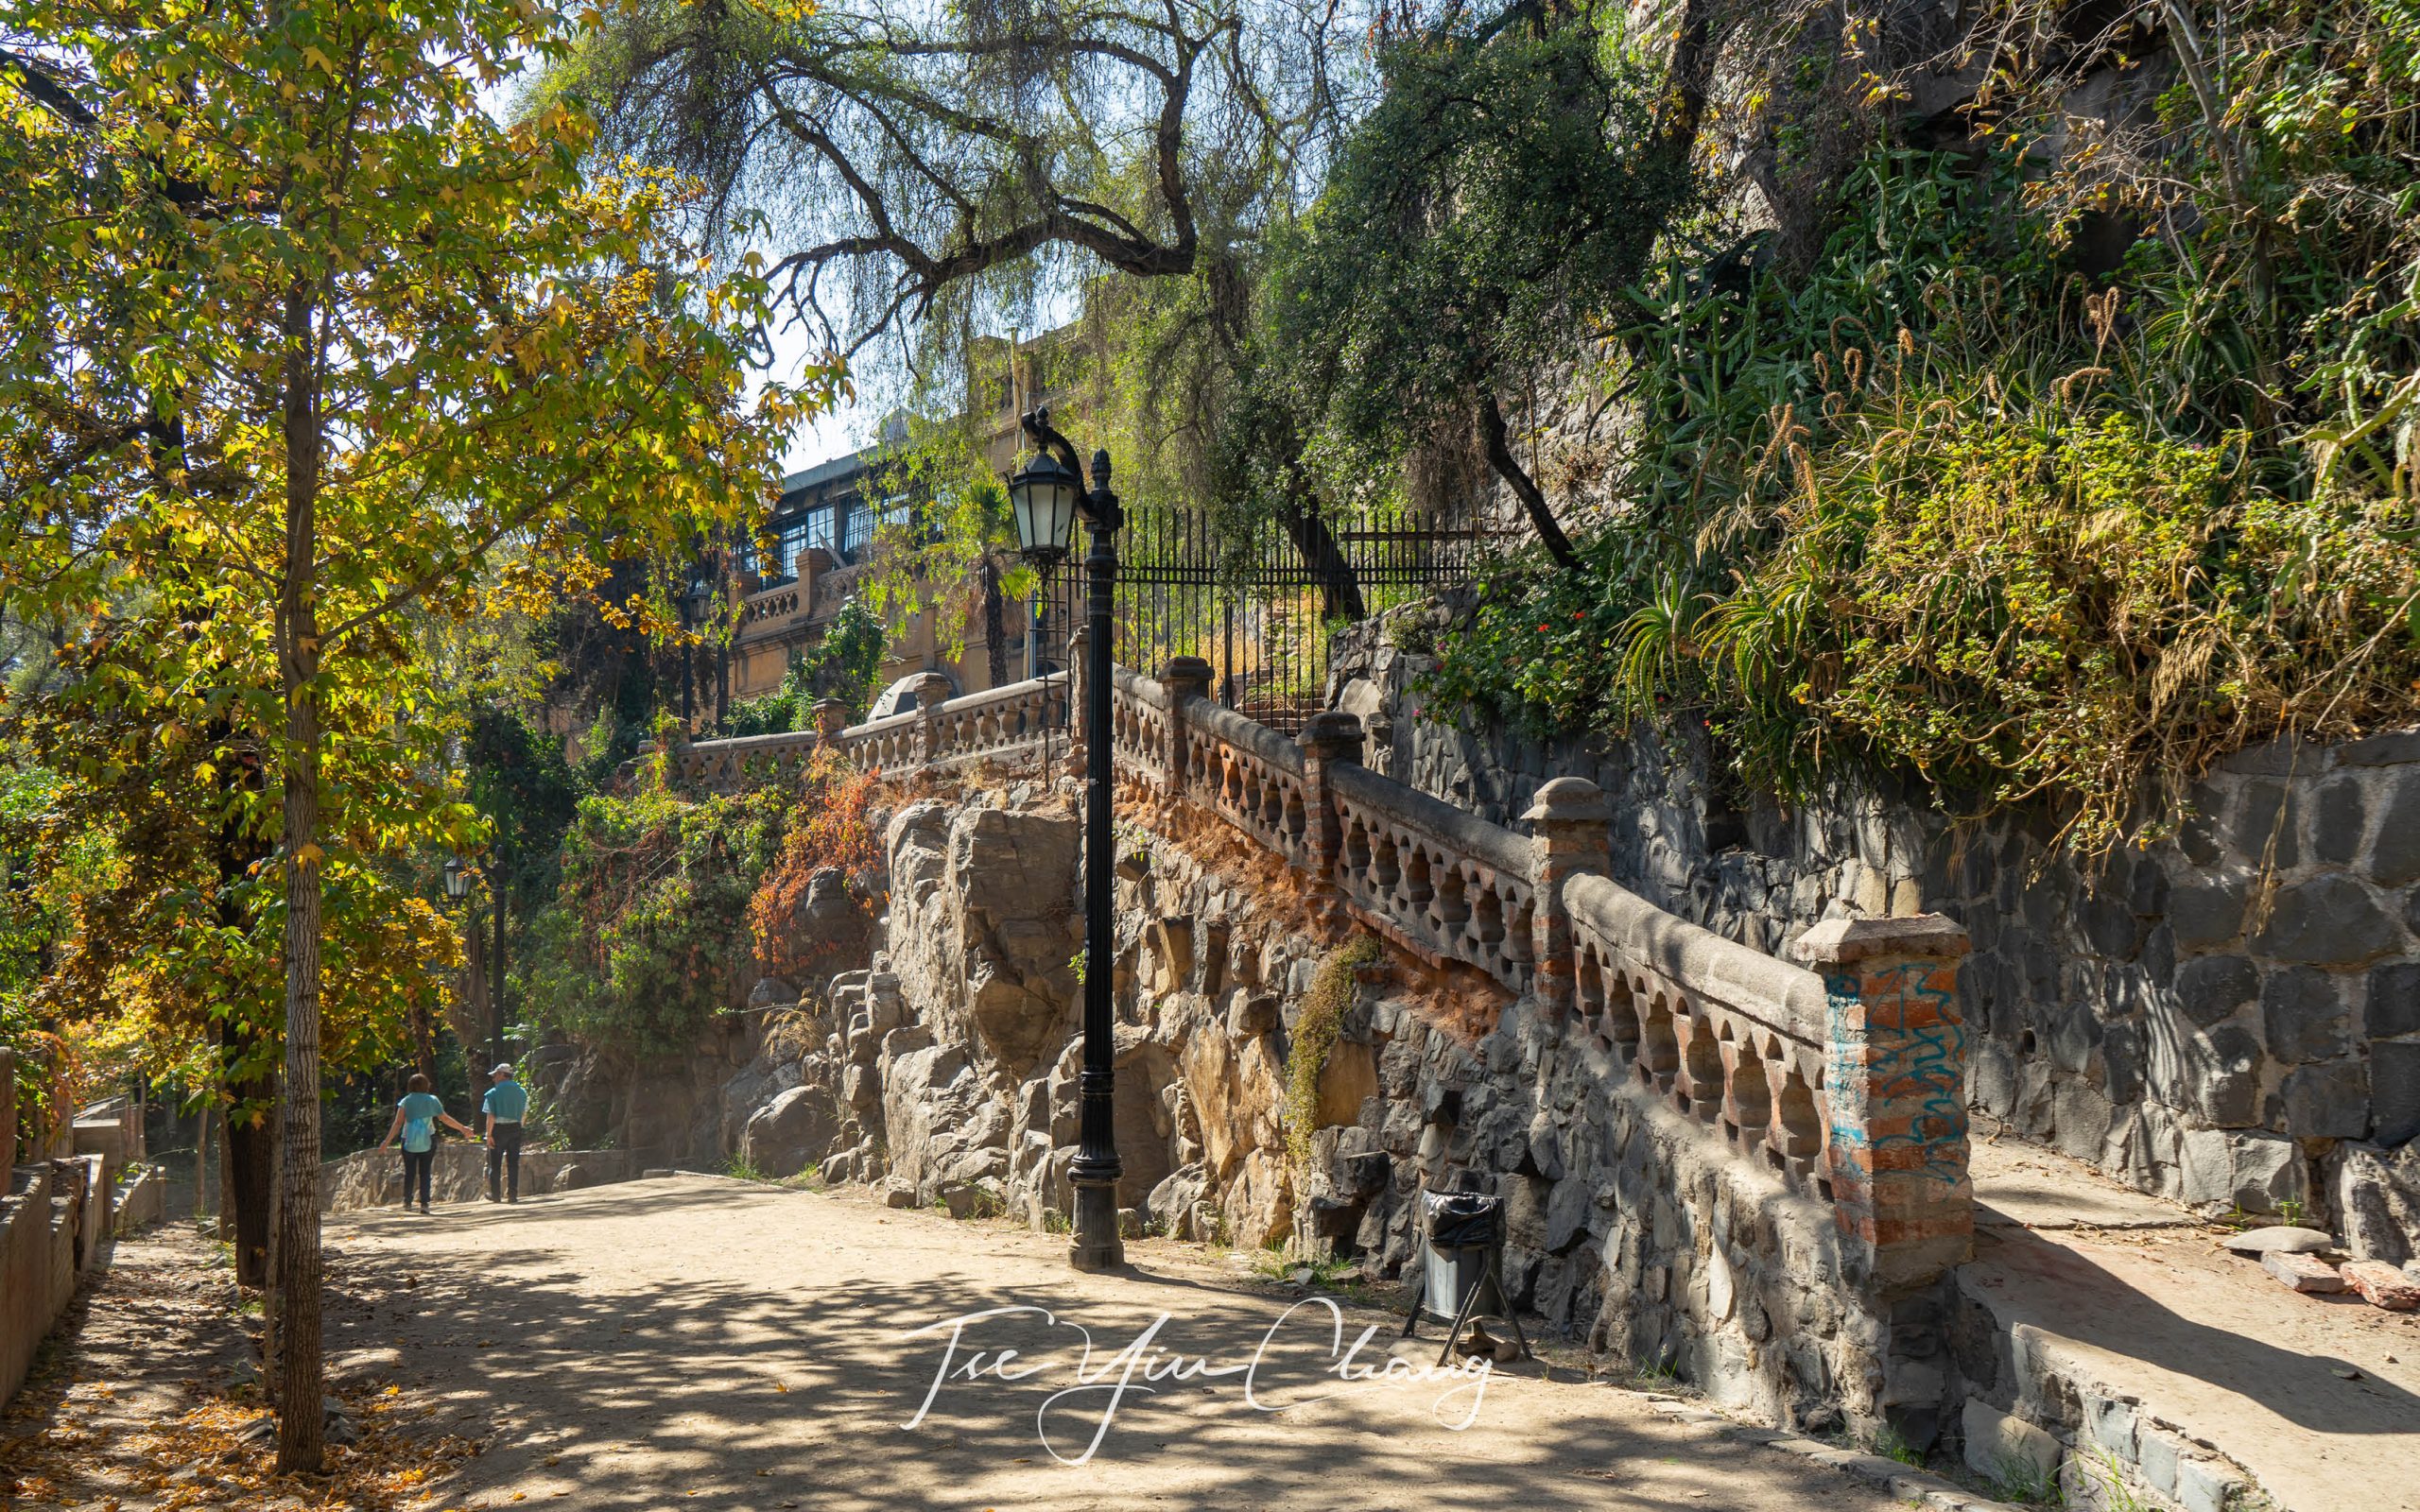 Cerro Santa Lucia is converted to a park and home to several ornate monuments